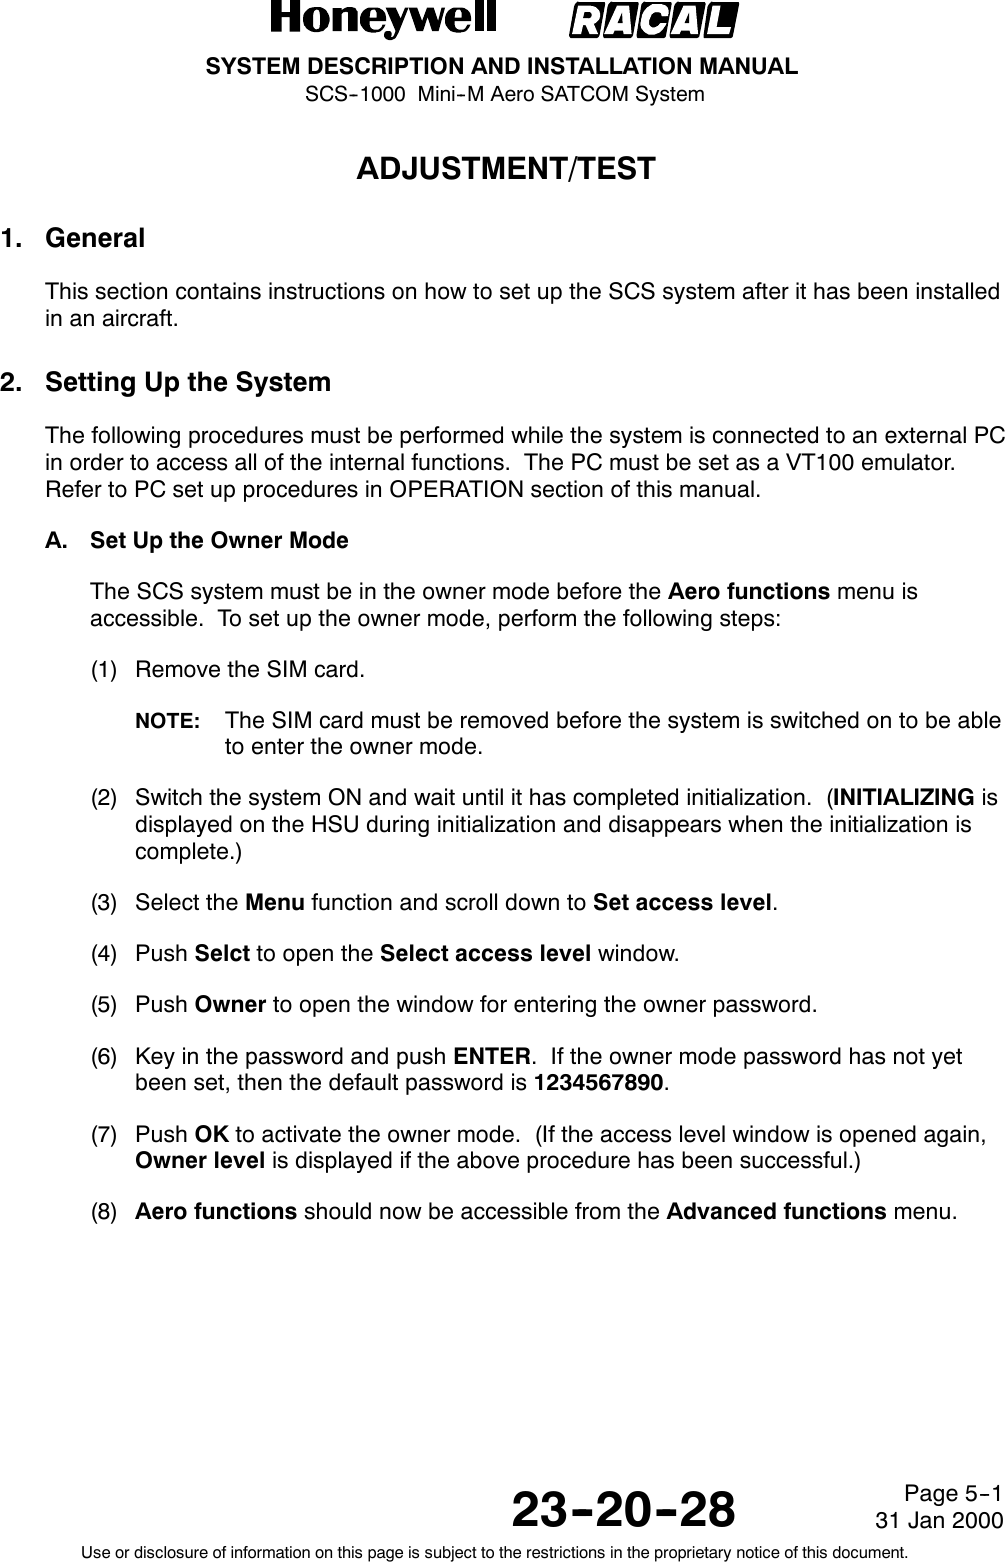 SYSTEM DESCRIPTION AND INSTALLATION MANUALSCS--1000 Mini--M Aero SATCOM System23--20--28Use or disclosure of information on this page is subject to the restrictions in the proprietary notice of this document.Page 5--131 Jan 2000ADJUSTMENT/TEST1. GeneralThis section contains instructions on how to set up the SCS system after it has been installedin an aircraft.2. Setting Up the SystemThe following procedures must be performed while the system is connected to an external PCin order to access all of the internal functions. The PC must be set as a VT100 emulator.Refer to PC set up procedures in OPERATION section of this manual.A. Set Up the Owner ModeThe SCS system must be in the owner mode before the Aero functions menu isaccessible. To set up the owner mode, perform the following steps:(1) Remove the SIM card.NOTE: The SIM card must be removed before the system is switched on to be ableto enter the owner mode.(2) Switch the system ON and wait until it has completed initialization. (INITIALIZING isdisplayed on the HSU during initialization and disappears when the initialization iscomplete.)(3) Select the Menu function and scroll down to Set access level.(4) Push Selct to open the Select access level window.(5) Push Owner to open the window for entering the owner password.(6) Key in the password and push ENTER. If the owner mode password has not yetbeen set, then the default password is 1234567890.(7) Push OK to activate the owner mode. (If the access level window is opened again,Owner level is displayed if the above procedure has been successful.)(8) Aero functions should now be accessible from the Advanced functions menu.